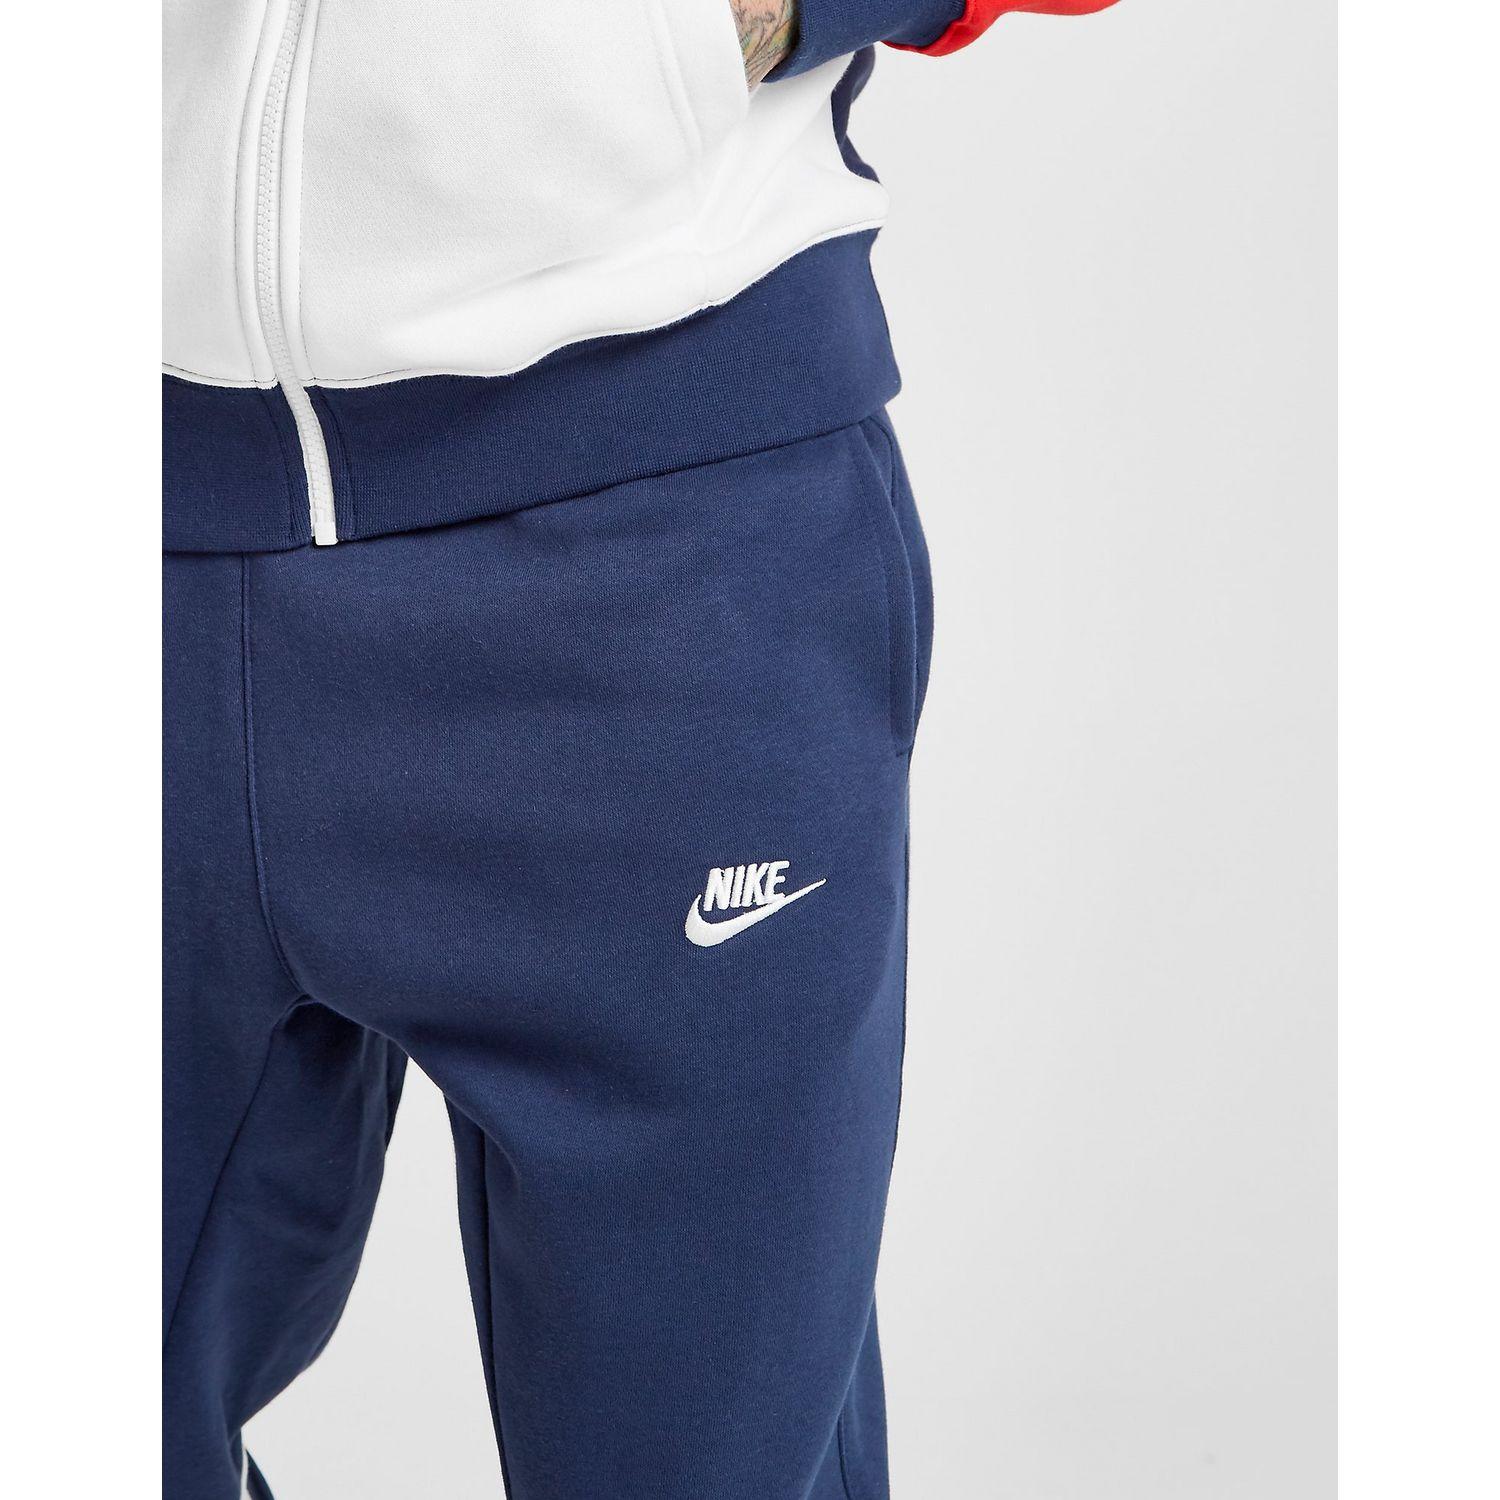 Nike Chariot Fleece Tracksuit in Navy/White/Red (Blue) for Men - Lyst